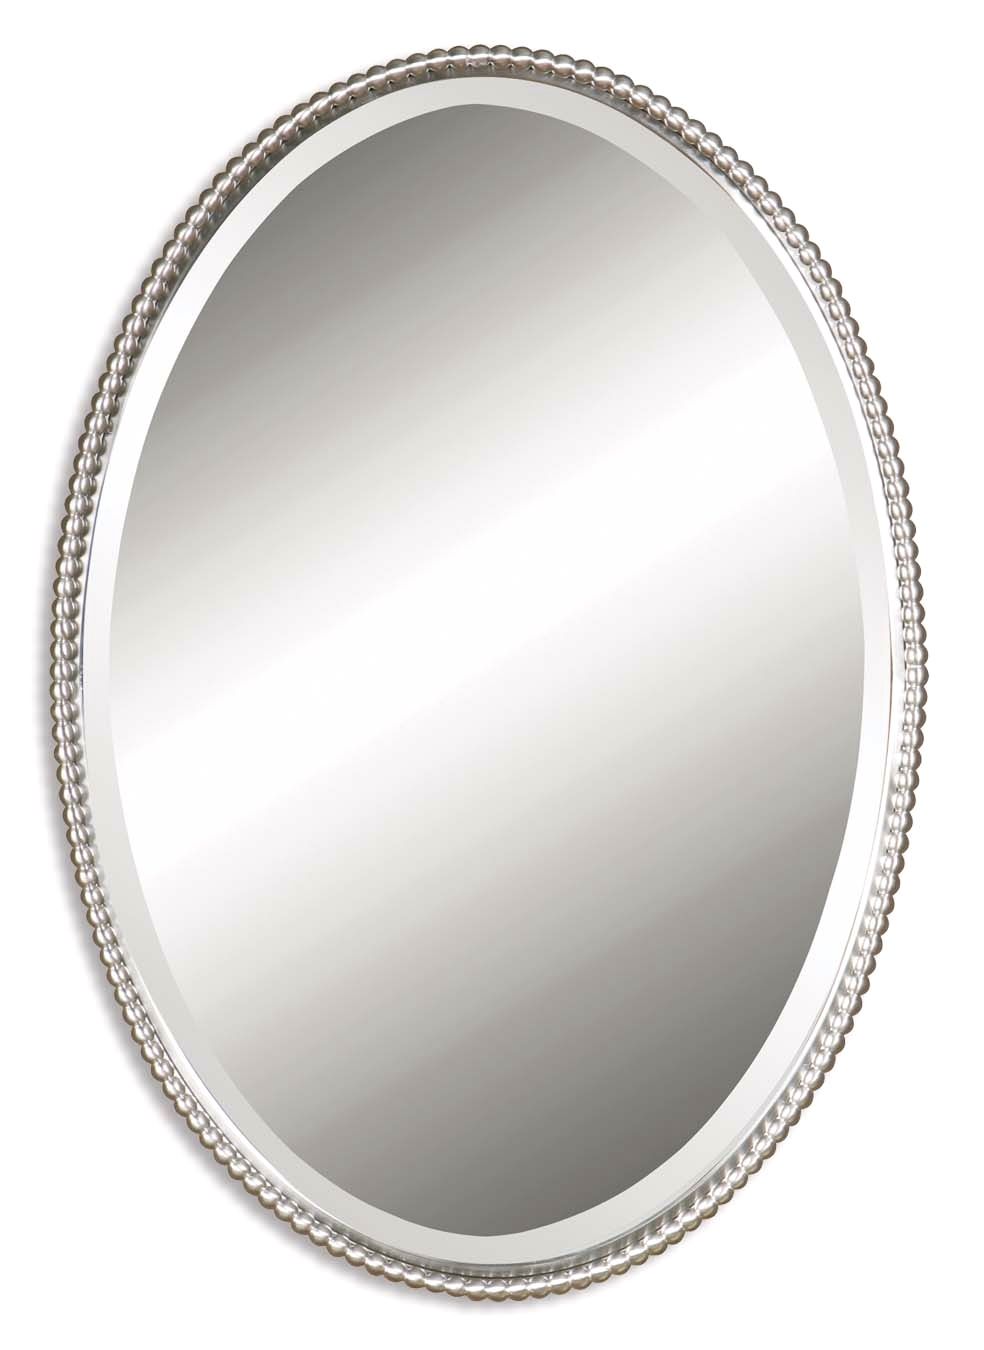 Sherise Modern Brushed Nickel Oval Mirror 01102 B Throughout Ceiling Hung Oval Mirrors (View 11 of 15)